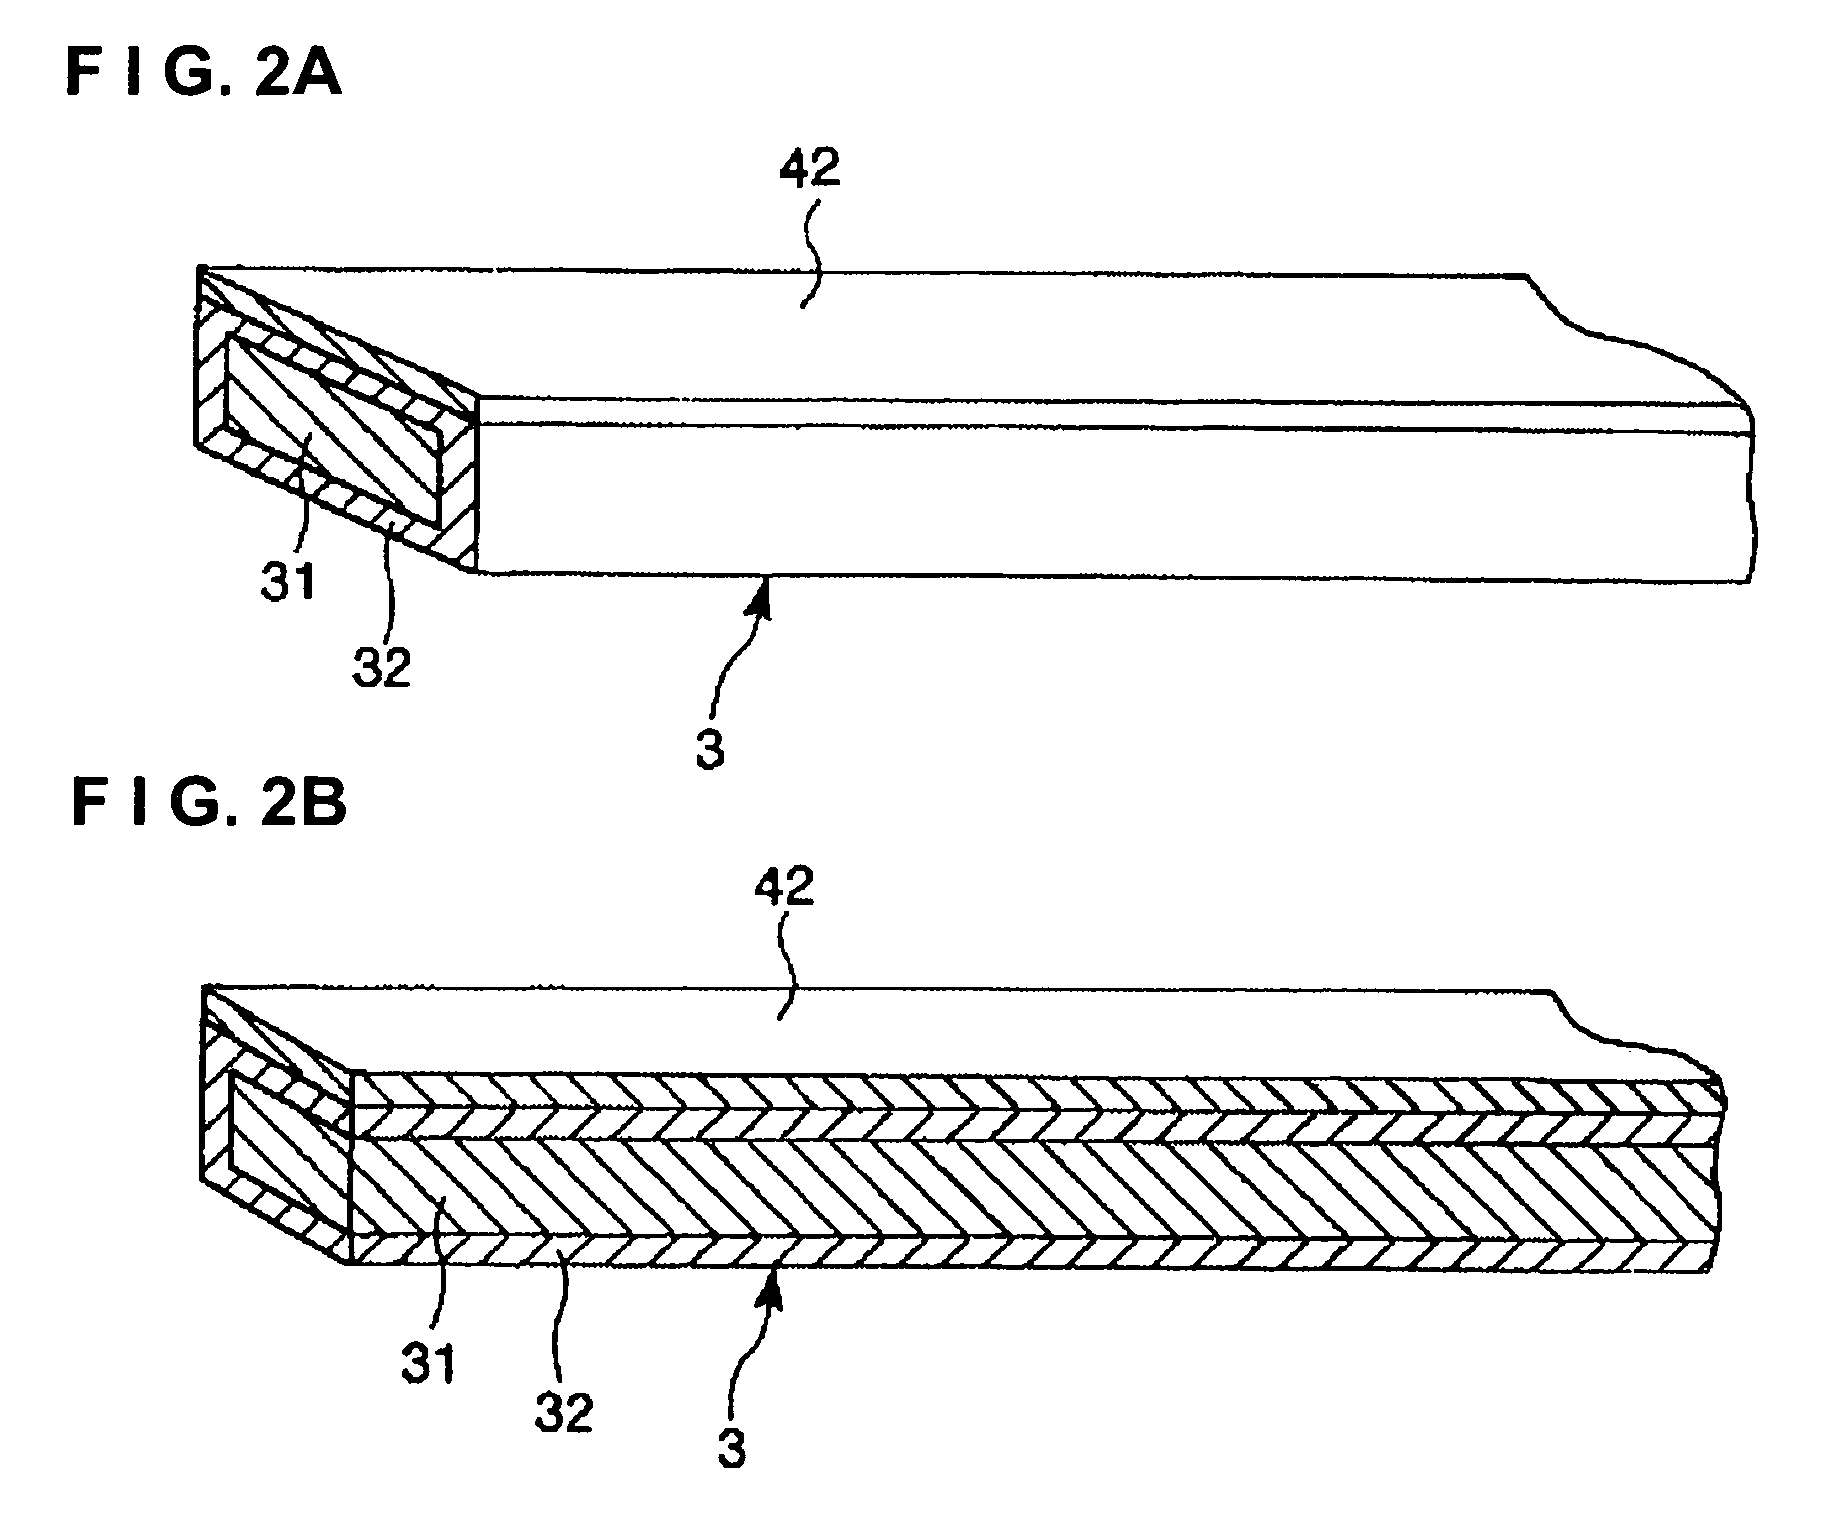 Display device having optical waveguides and light-emitting units